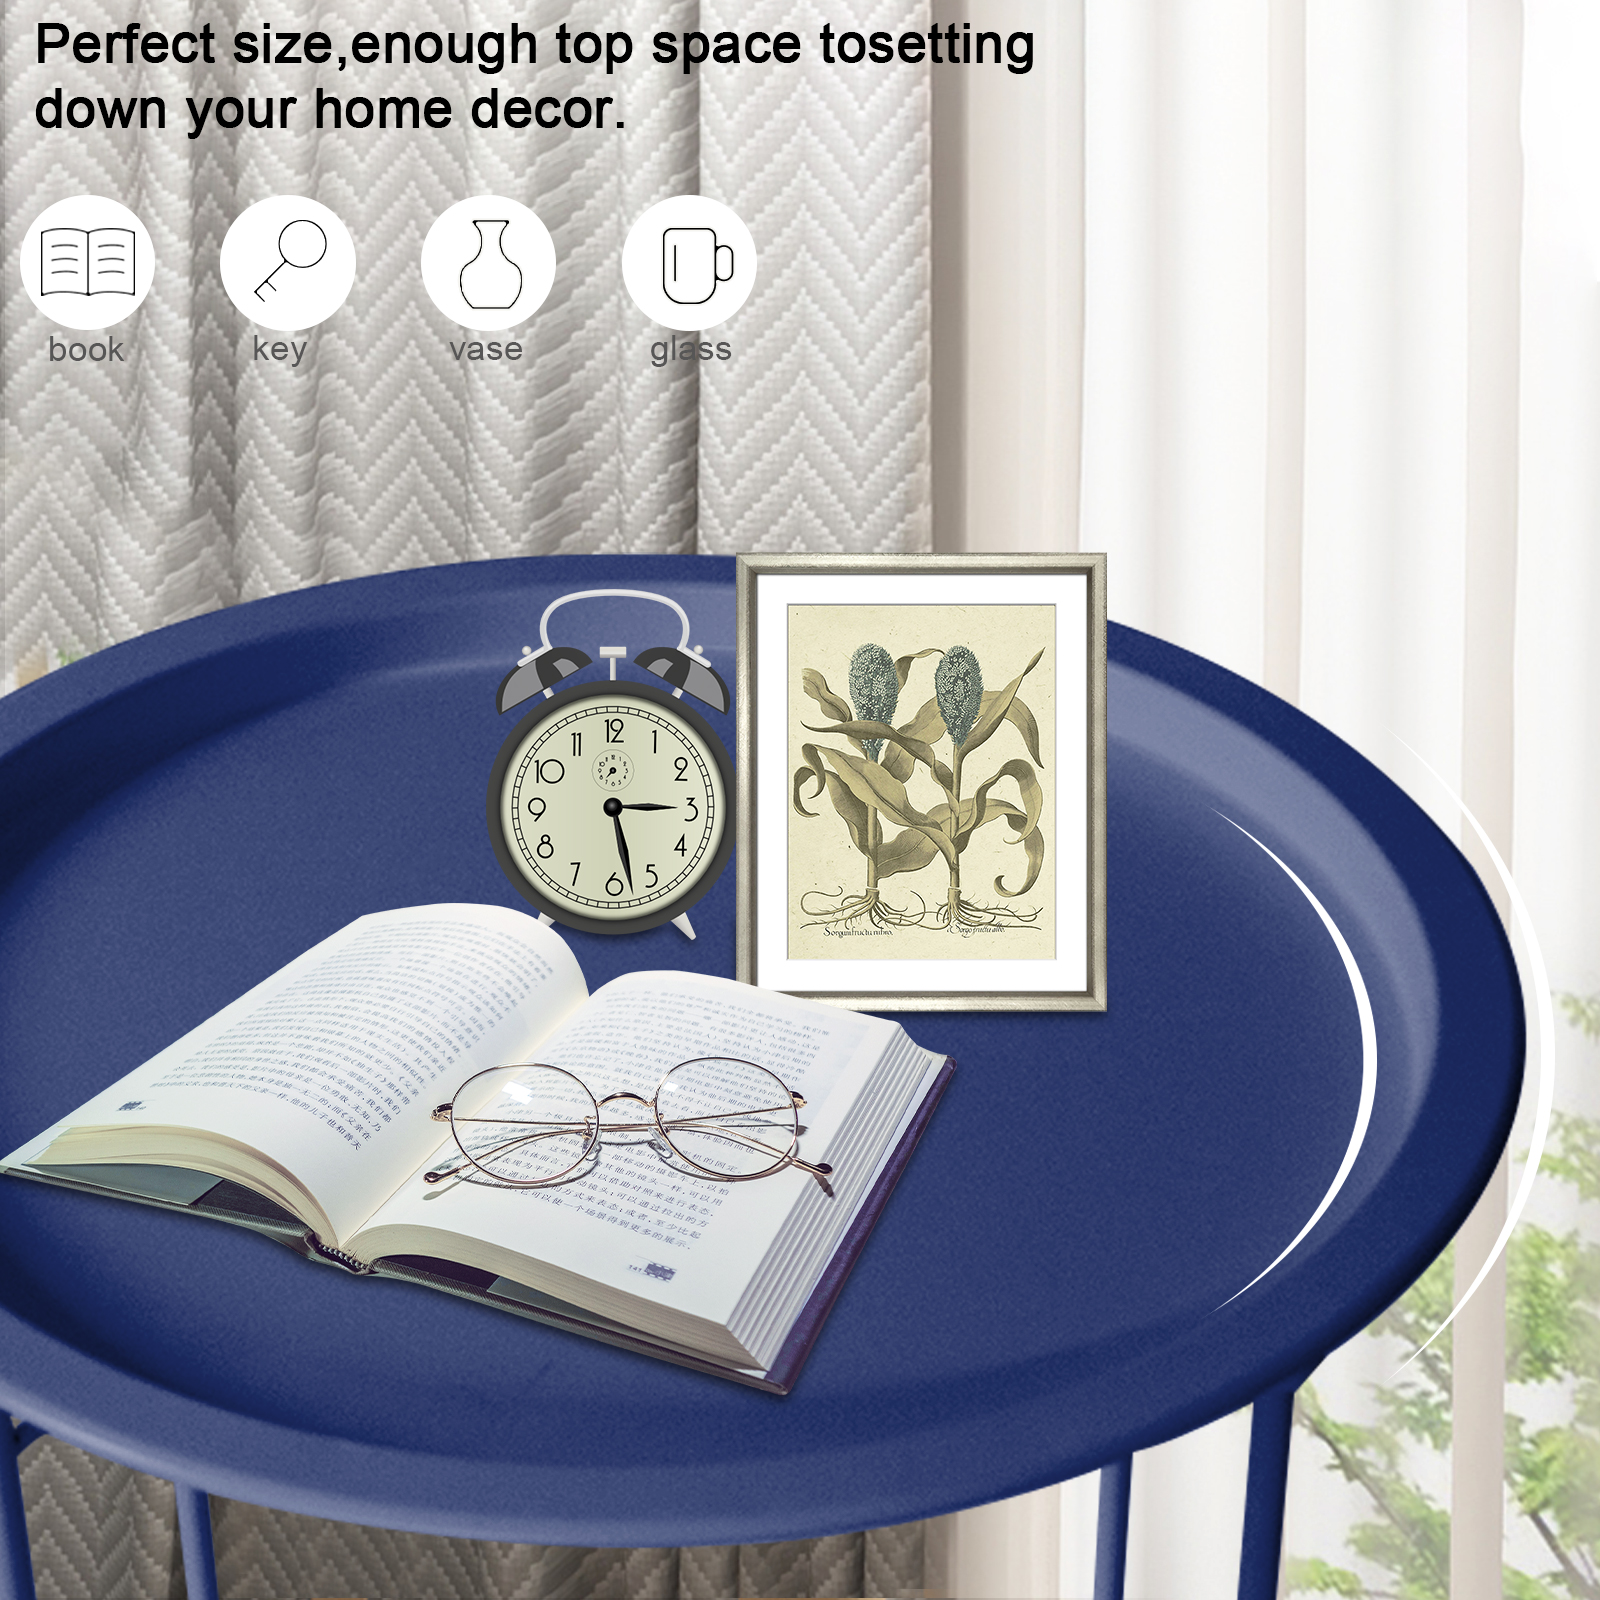 Folding Tray Metal Side Table Round End Table,Dark Blue Sofa Small Accent Fold-able Table, Round End Table Tray, Next to Sofa Table, Snack Table for Living Room and Bed Room - image 3 of 6